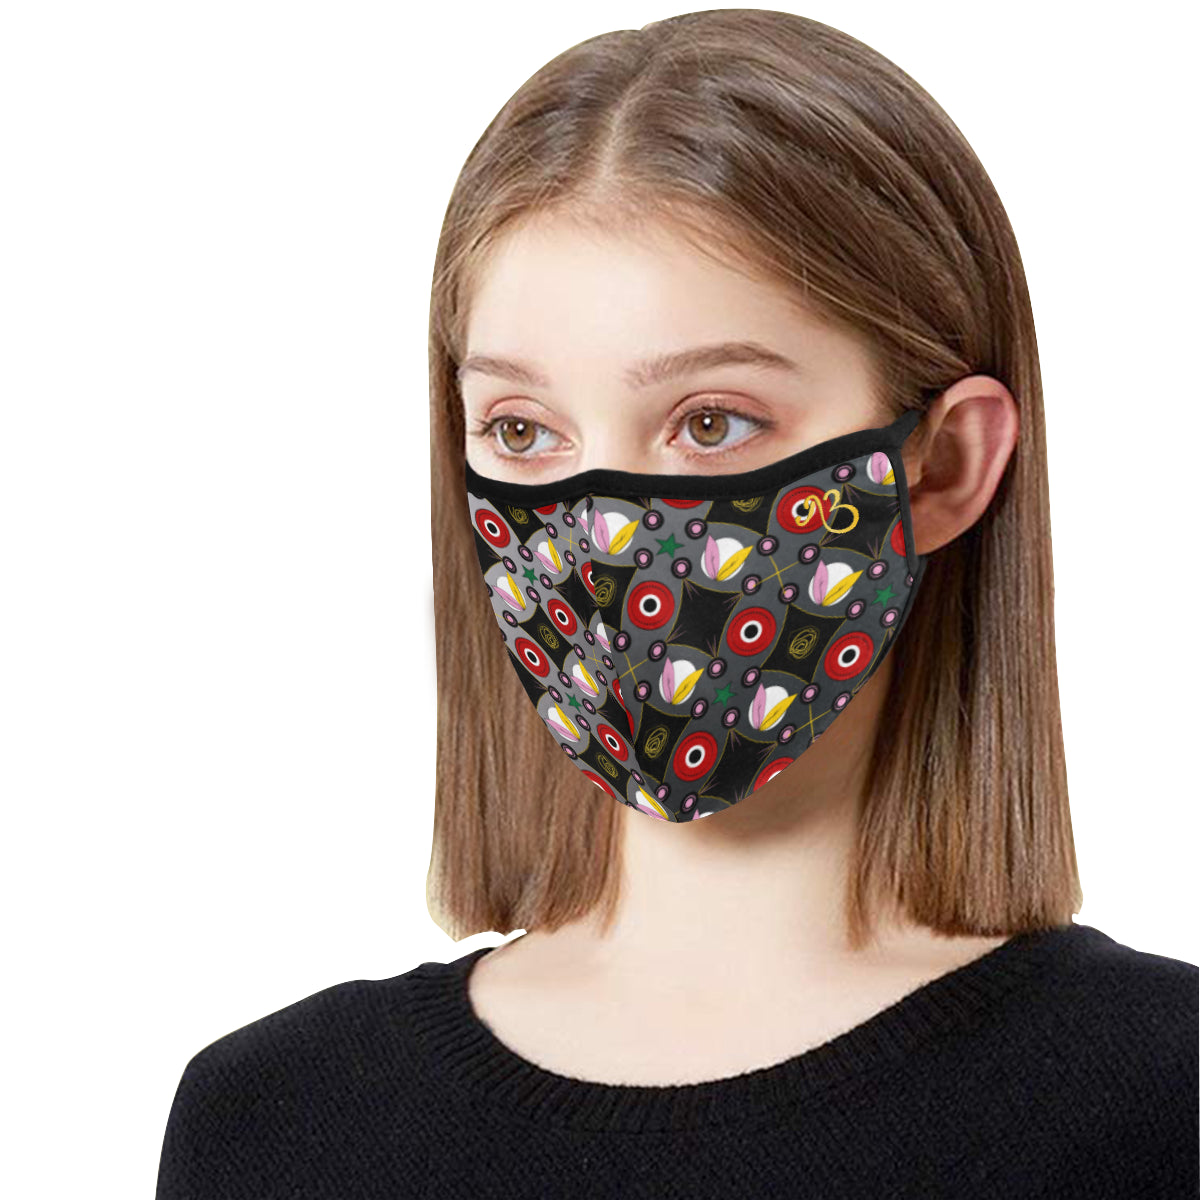 Inception Print Cotton Fabric Face Mask with filter slot (30 Filters Included) - Non-medical use